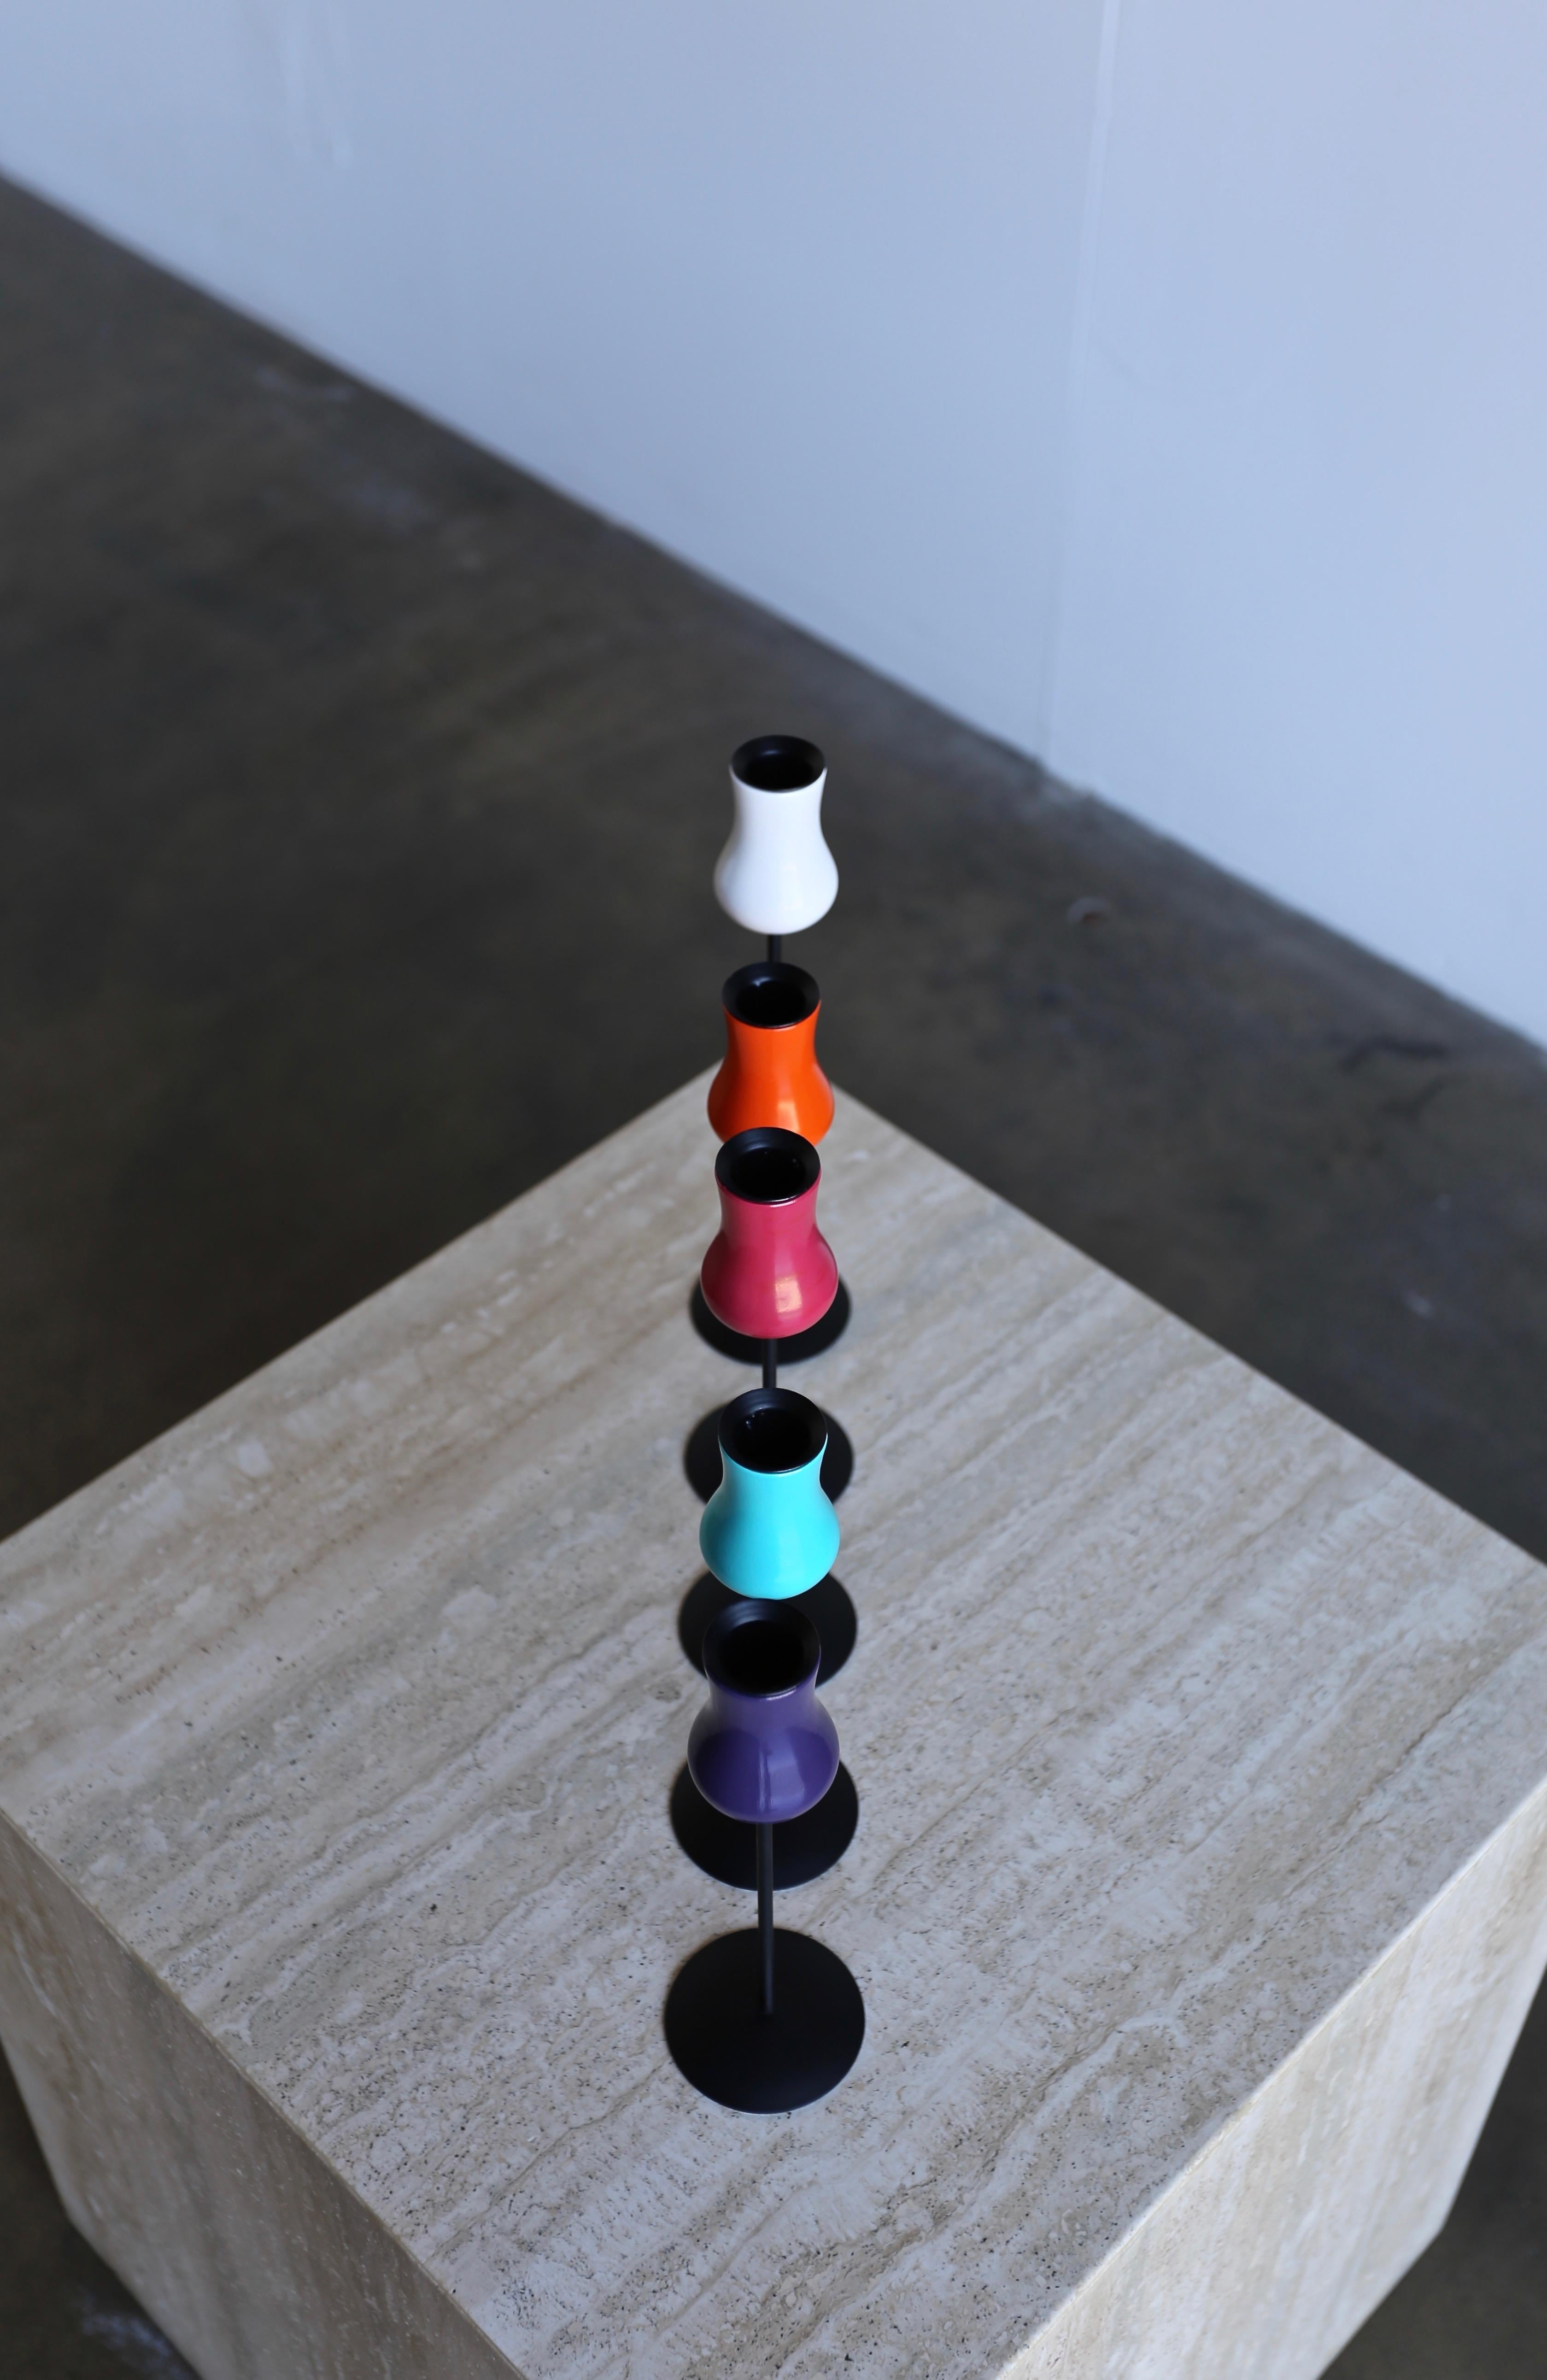 Painted Candlesticks by Laurids Lonborg